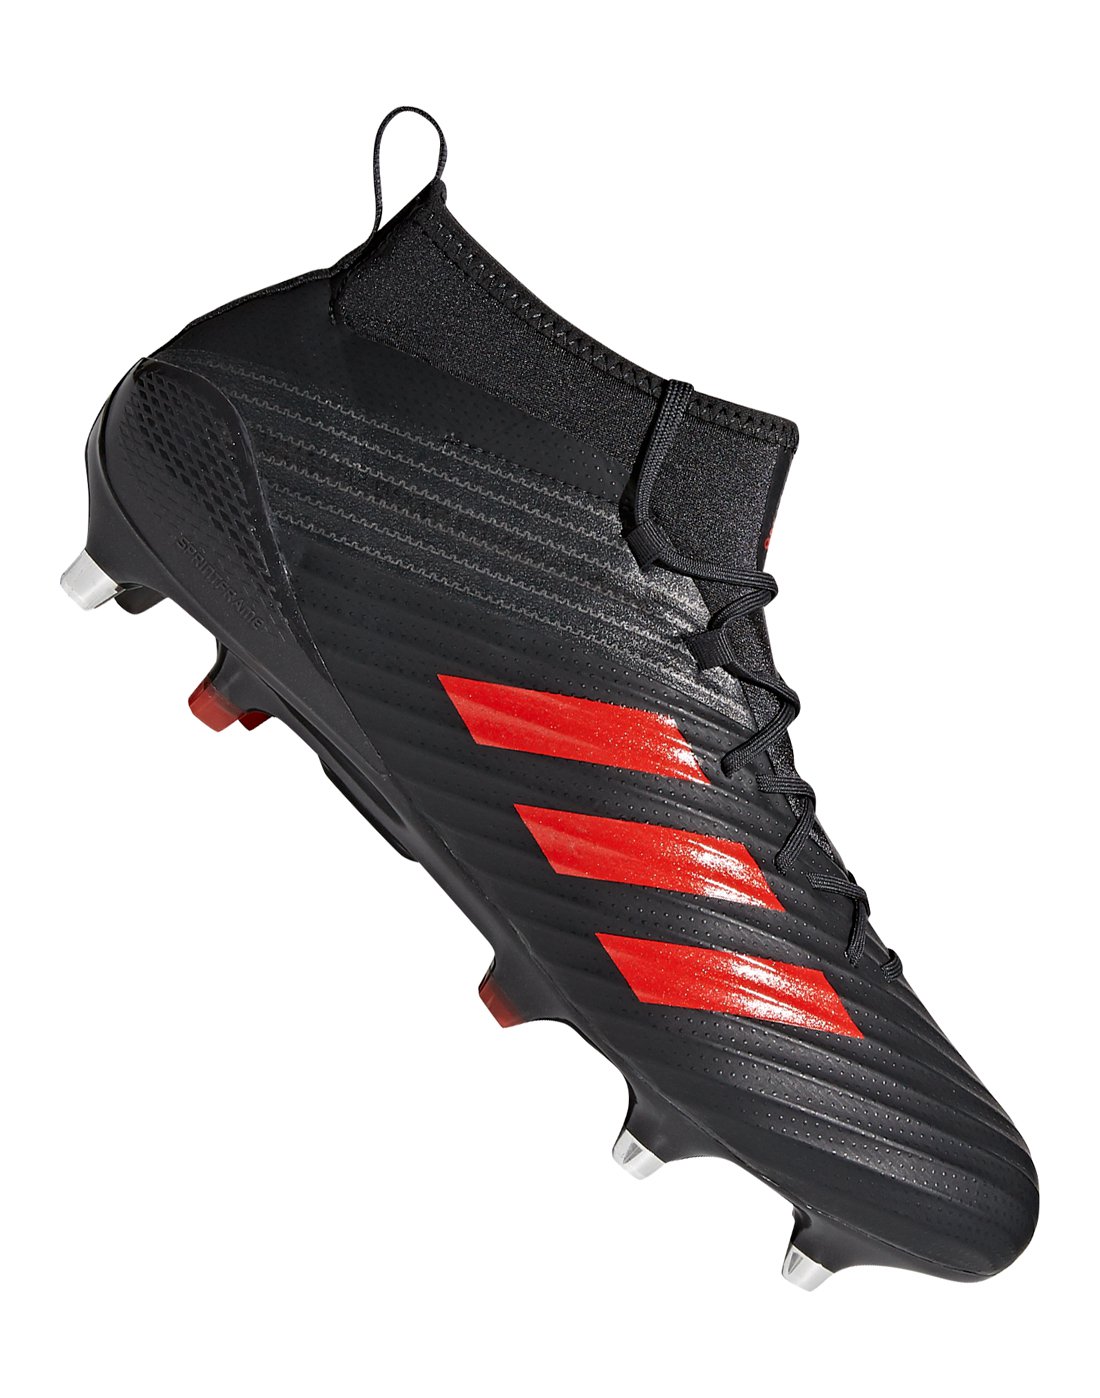 adidas flare sg rugby boots